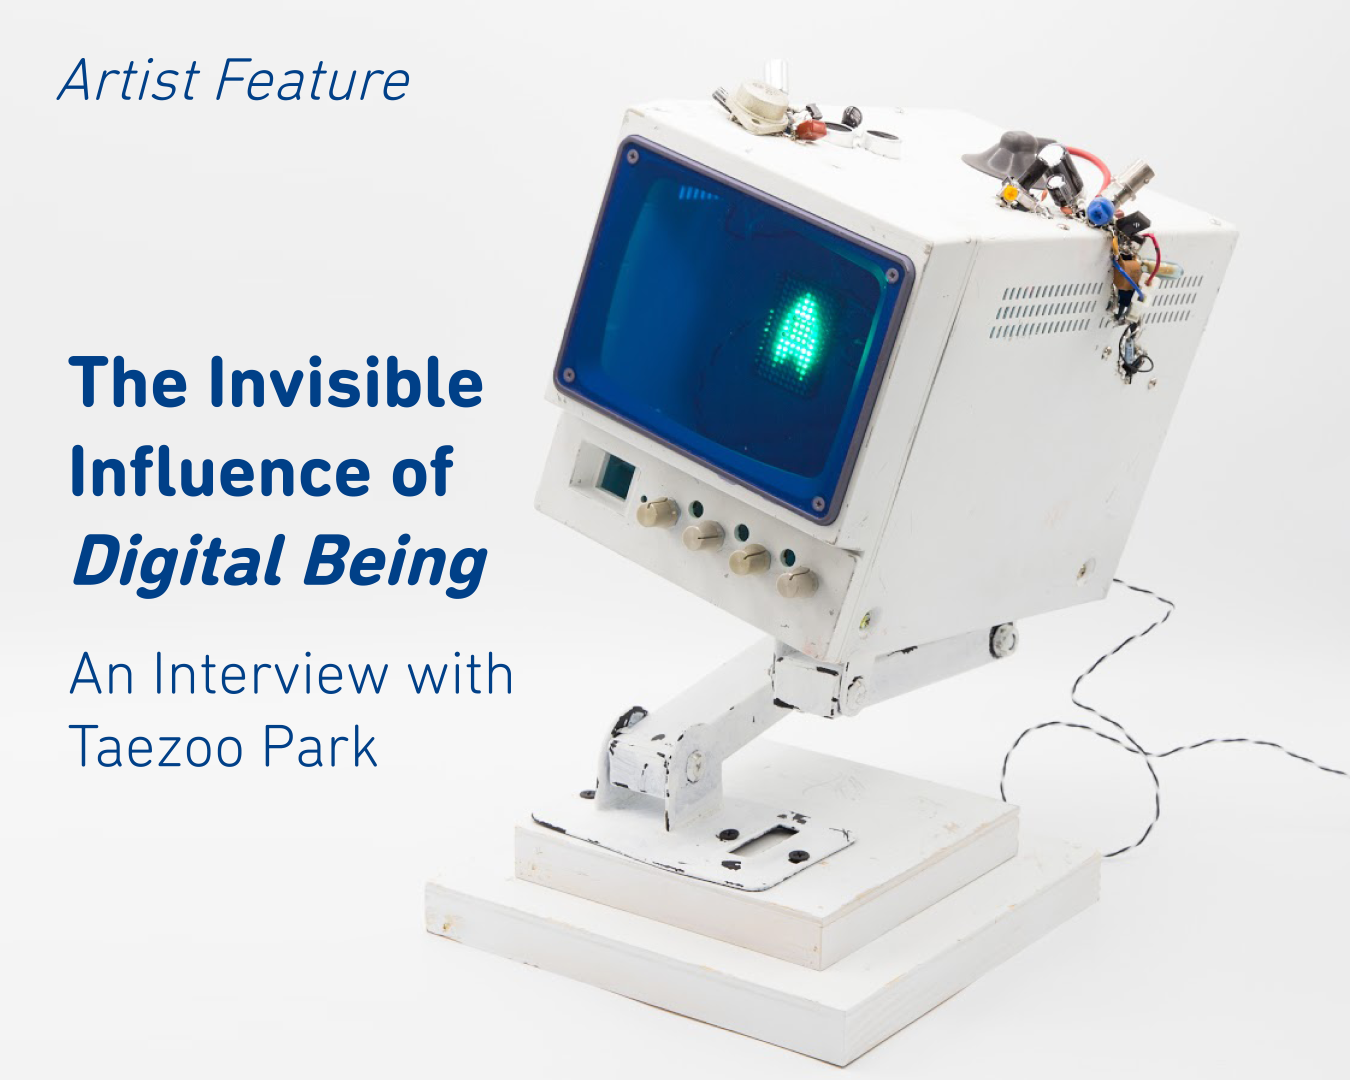 The Invisible Influence of Digital Being: An Interview with Taezoo Park